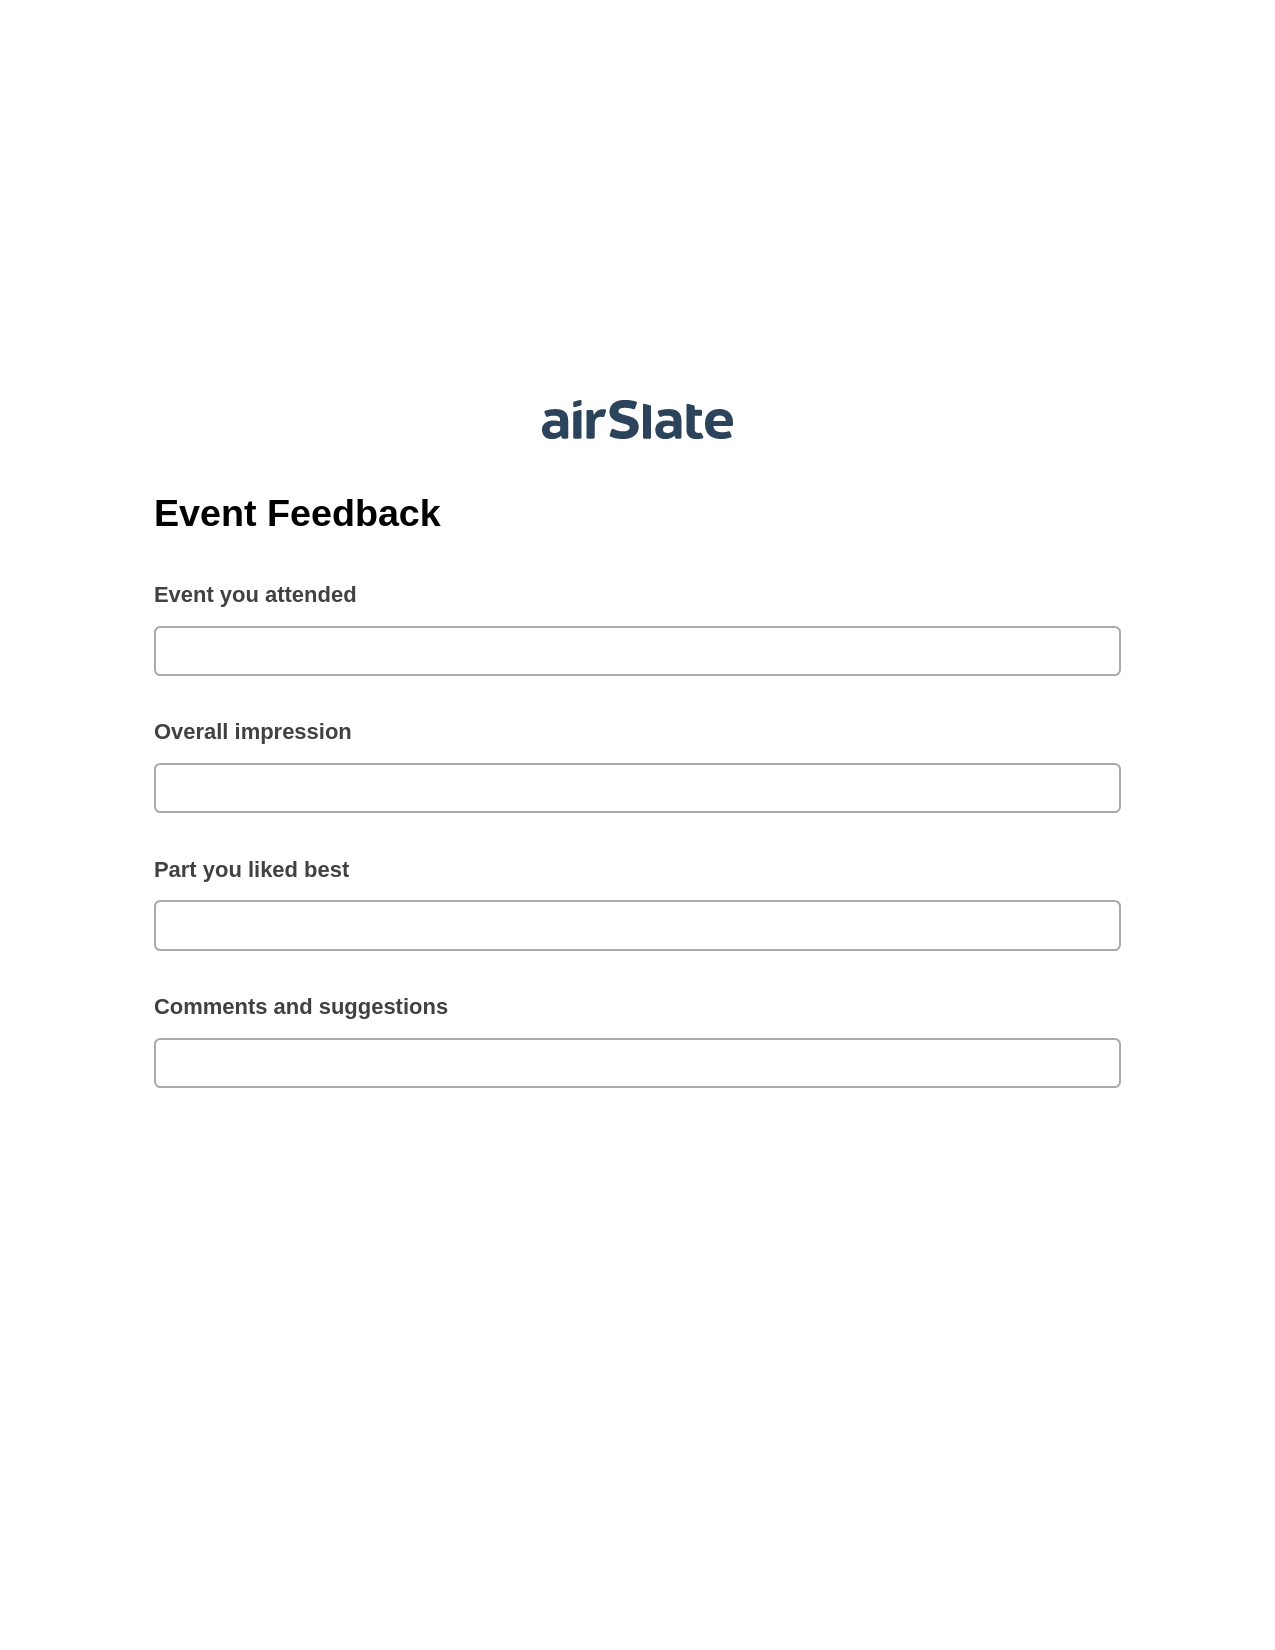 Event Feedback Pre-fill Dropdown from Airtable, Create MS Dynamics 365 Records Bot, Export to Excel 365 Bot